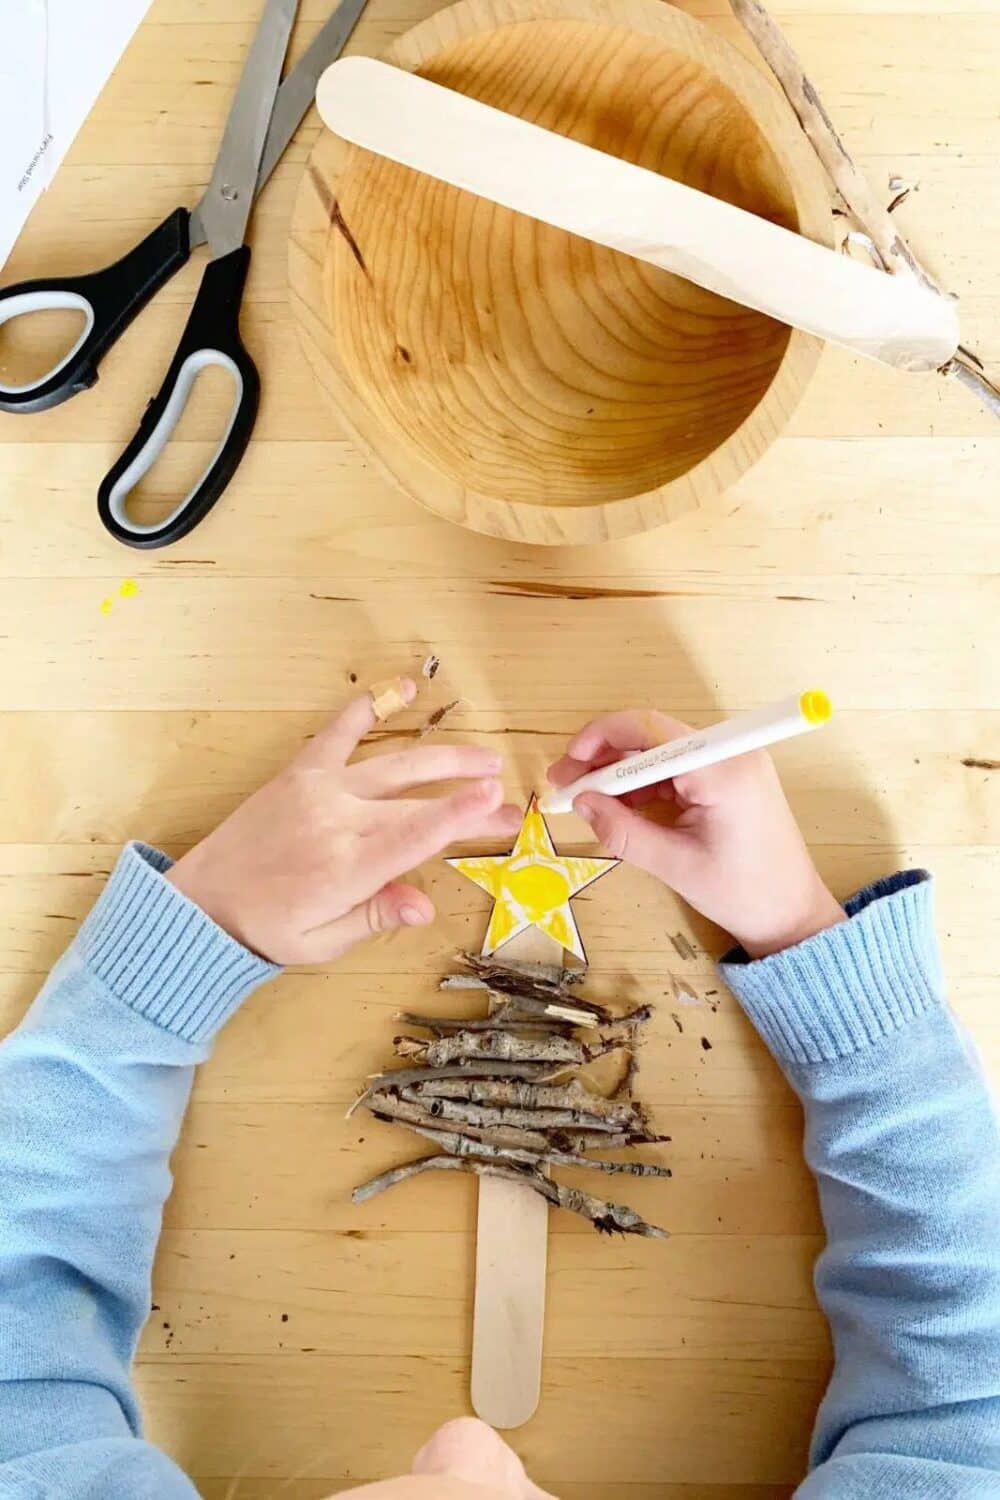 A child's hands working on a Christmas ornament craft by gluing sticks and a yellow star onto a craft stick to look like a little Christmas tree.